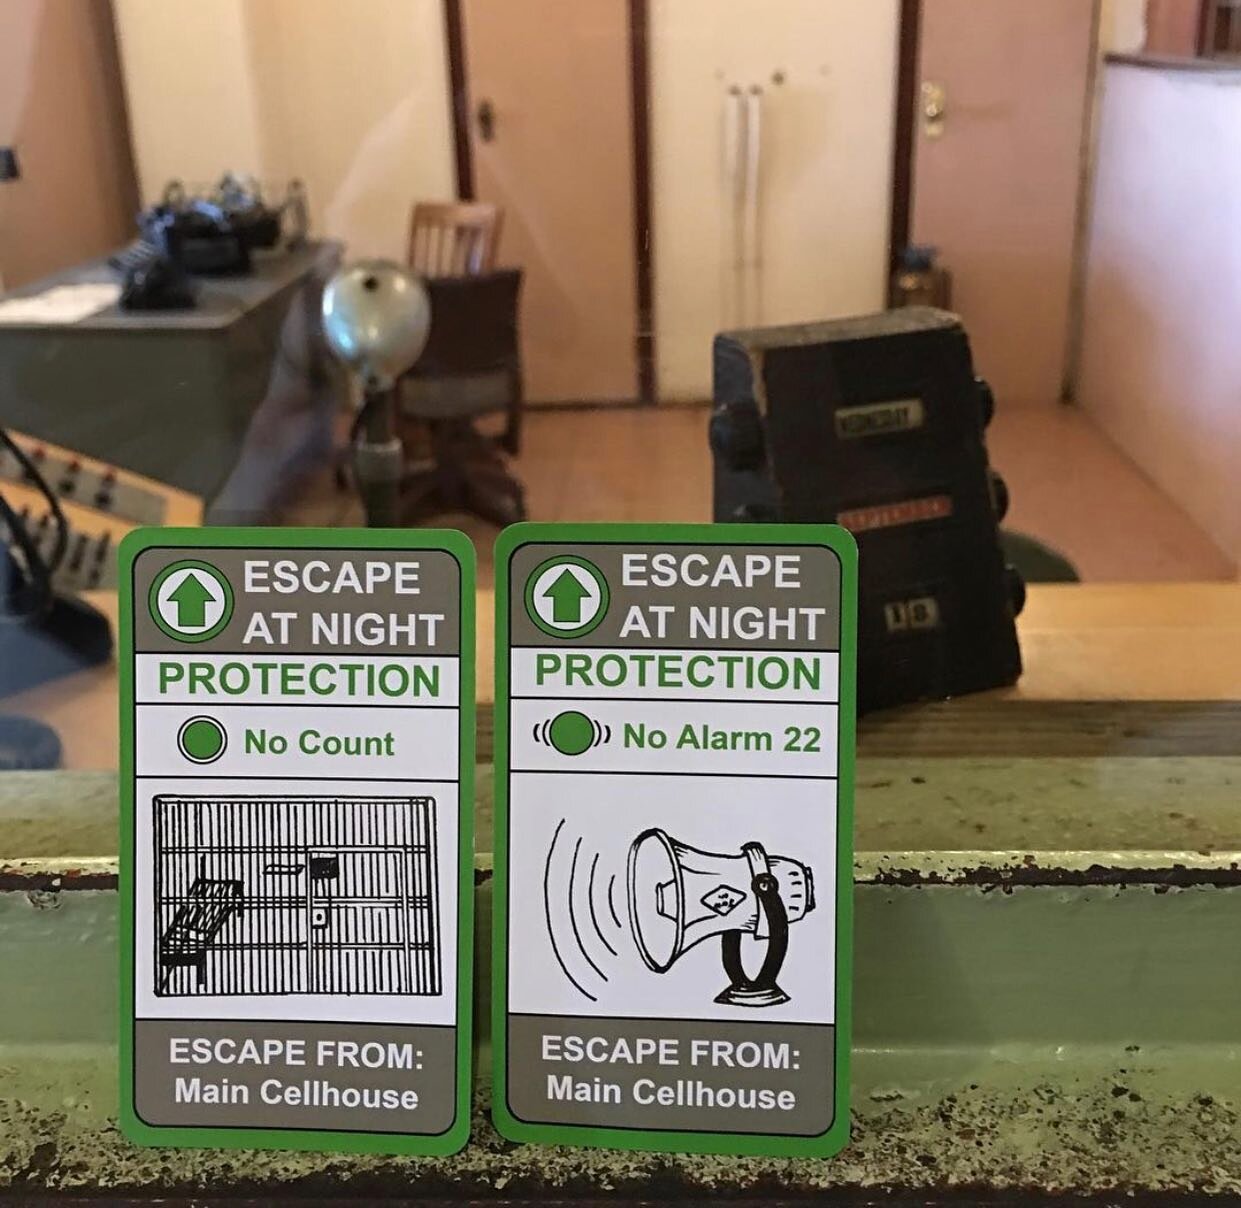 Stay out of sight, and don&rsquo;t make a peep 🤫 the more cards you collect to aid your escape, the easier it may be! 

#alcatraz #escape #alarm22 #quiet #sneaky #sanfrancisco #boardgames #xscapers #breakout #gamersofinstagram #boardgamegeek